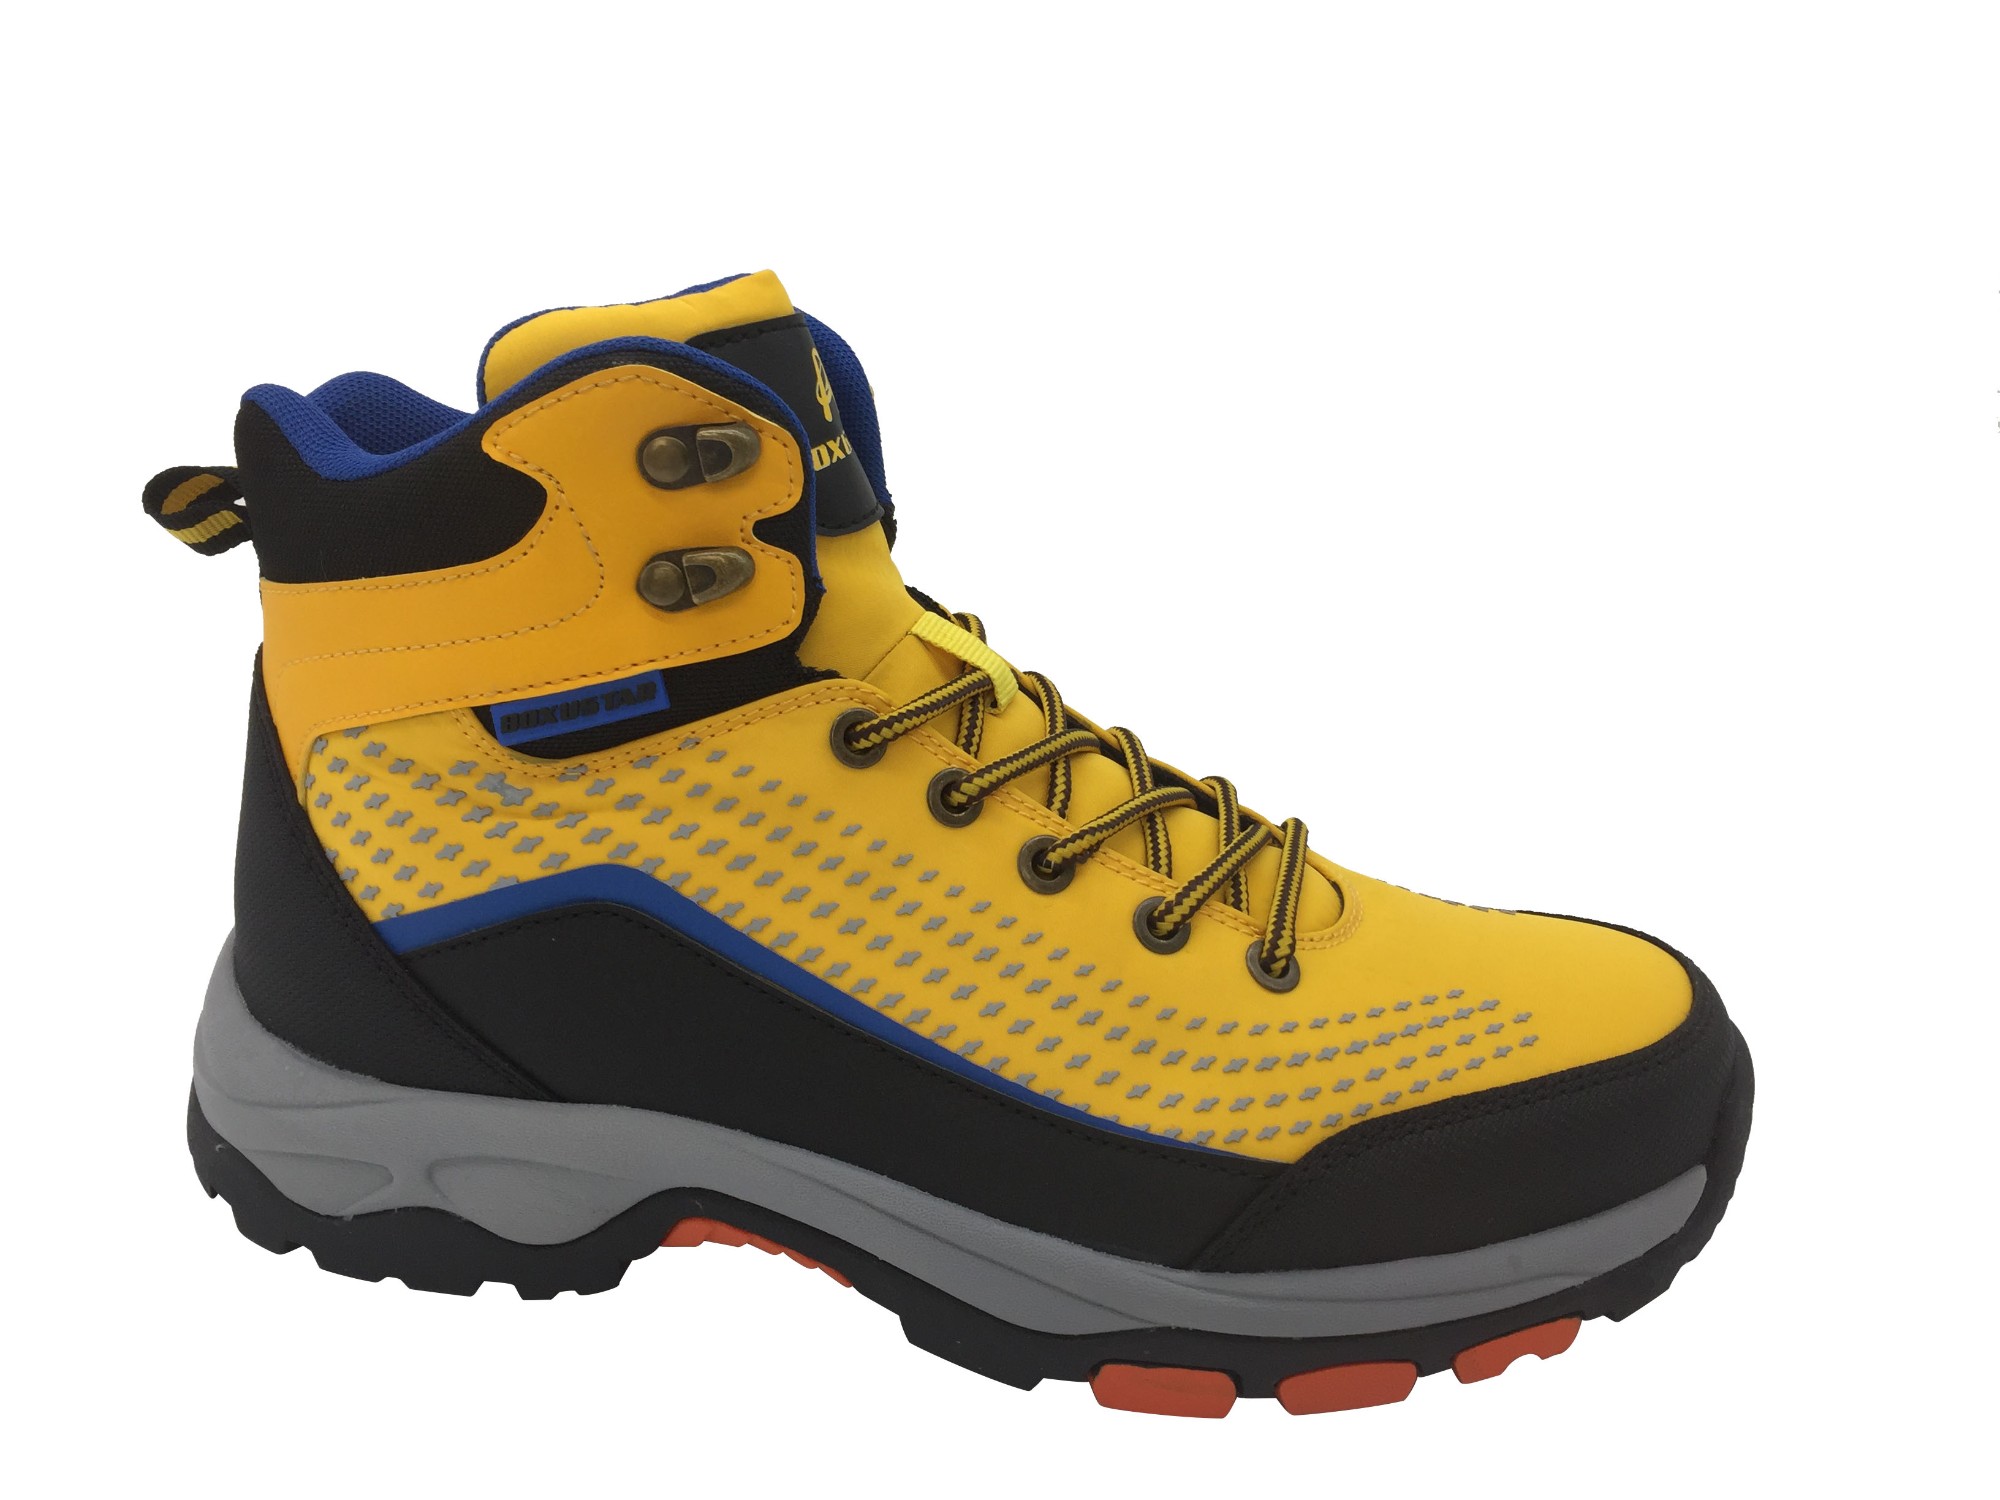 Outdoor Men's Hiking Shoes Hiking Boots Breathable, High-Traction Grip